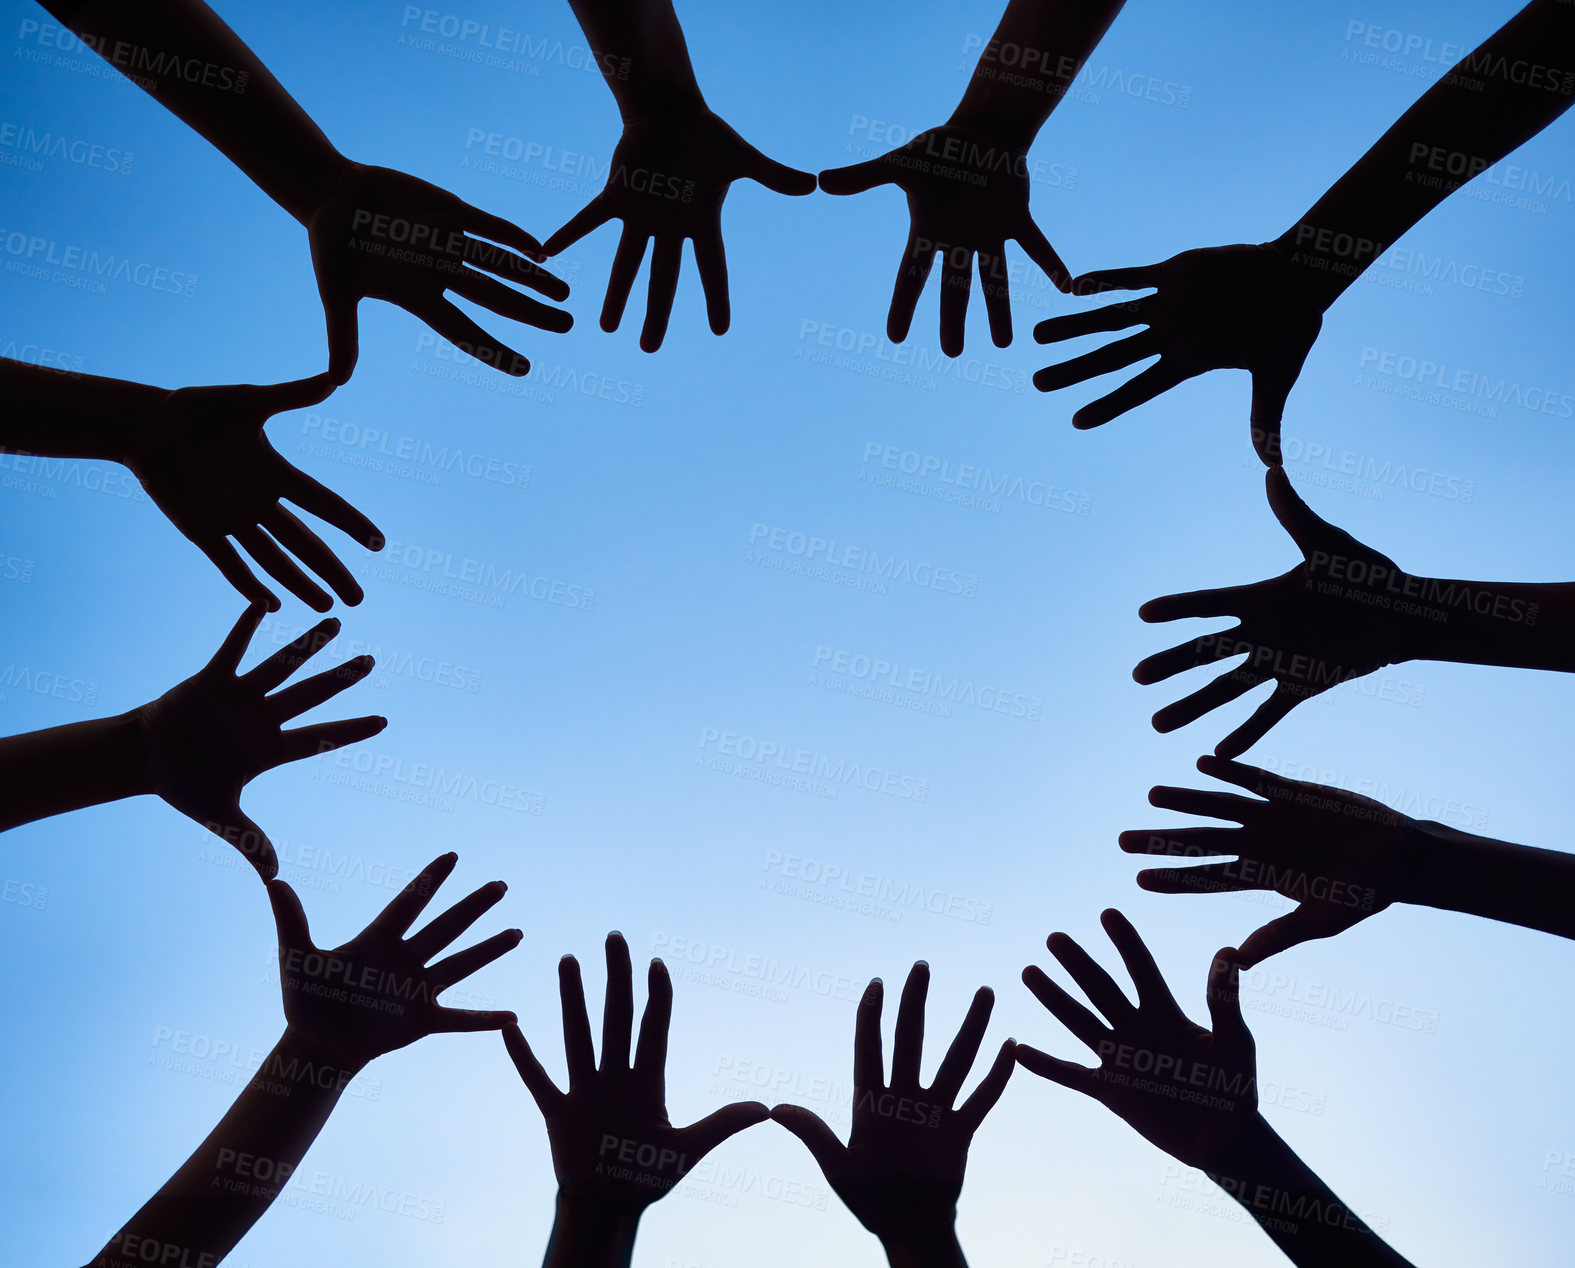 Buy stock photo Low angle shot of hands forming a circle against a bright blue sky